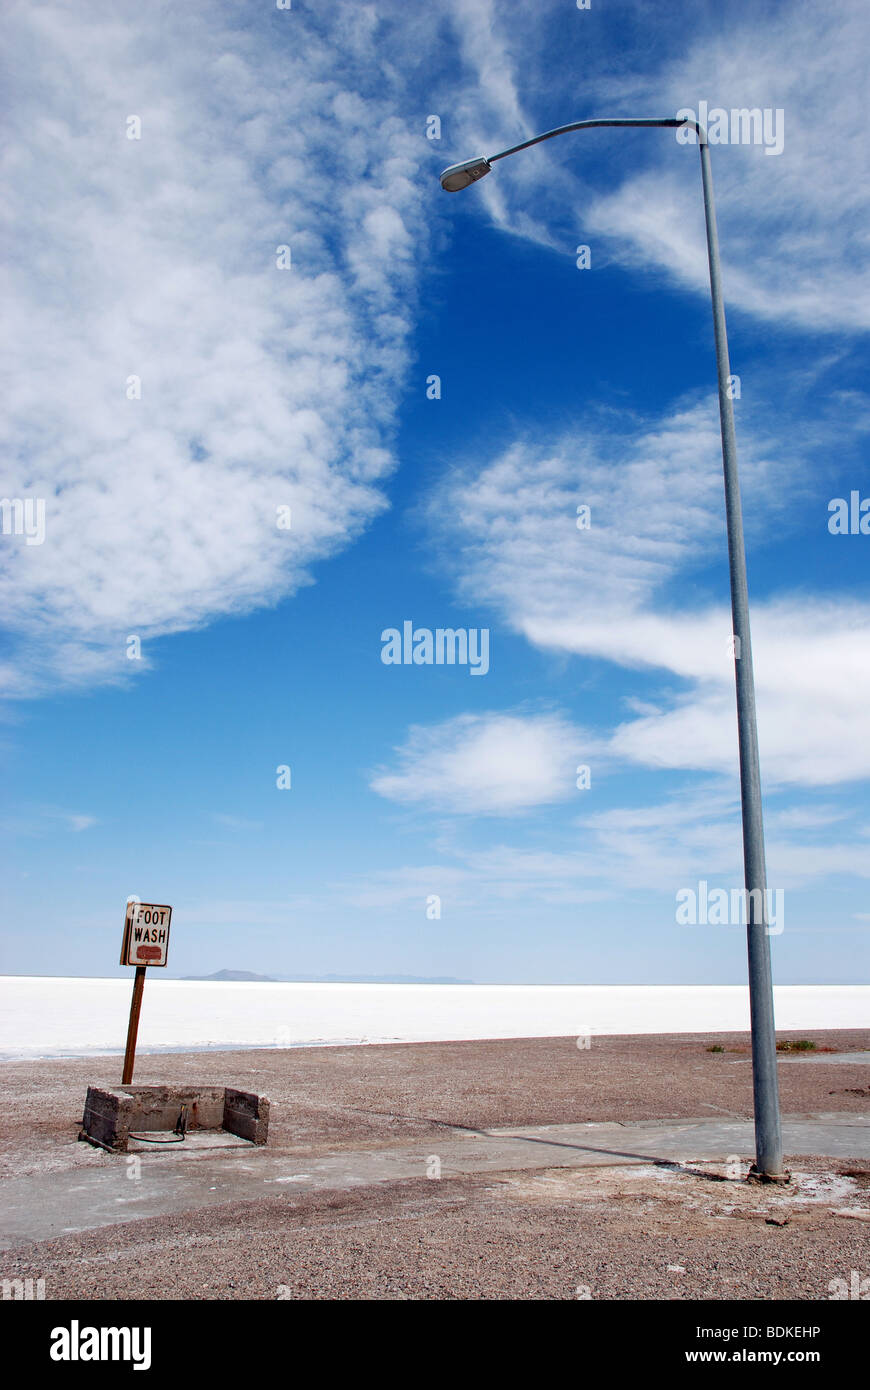 Bonneville salt flats sign High Resolution Stock Photography and Images -  Alamy